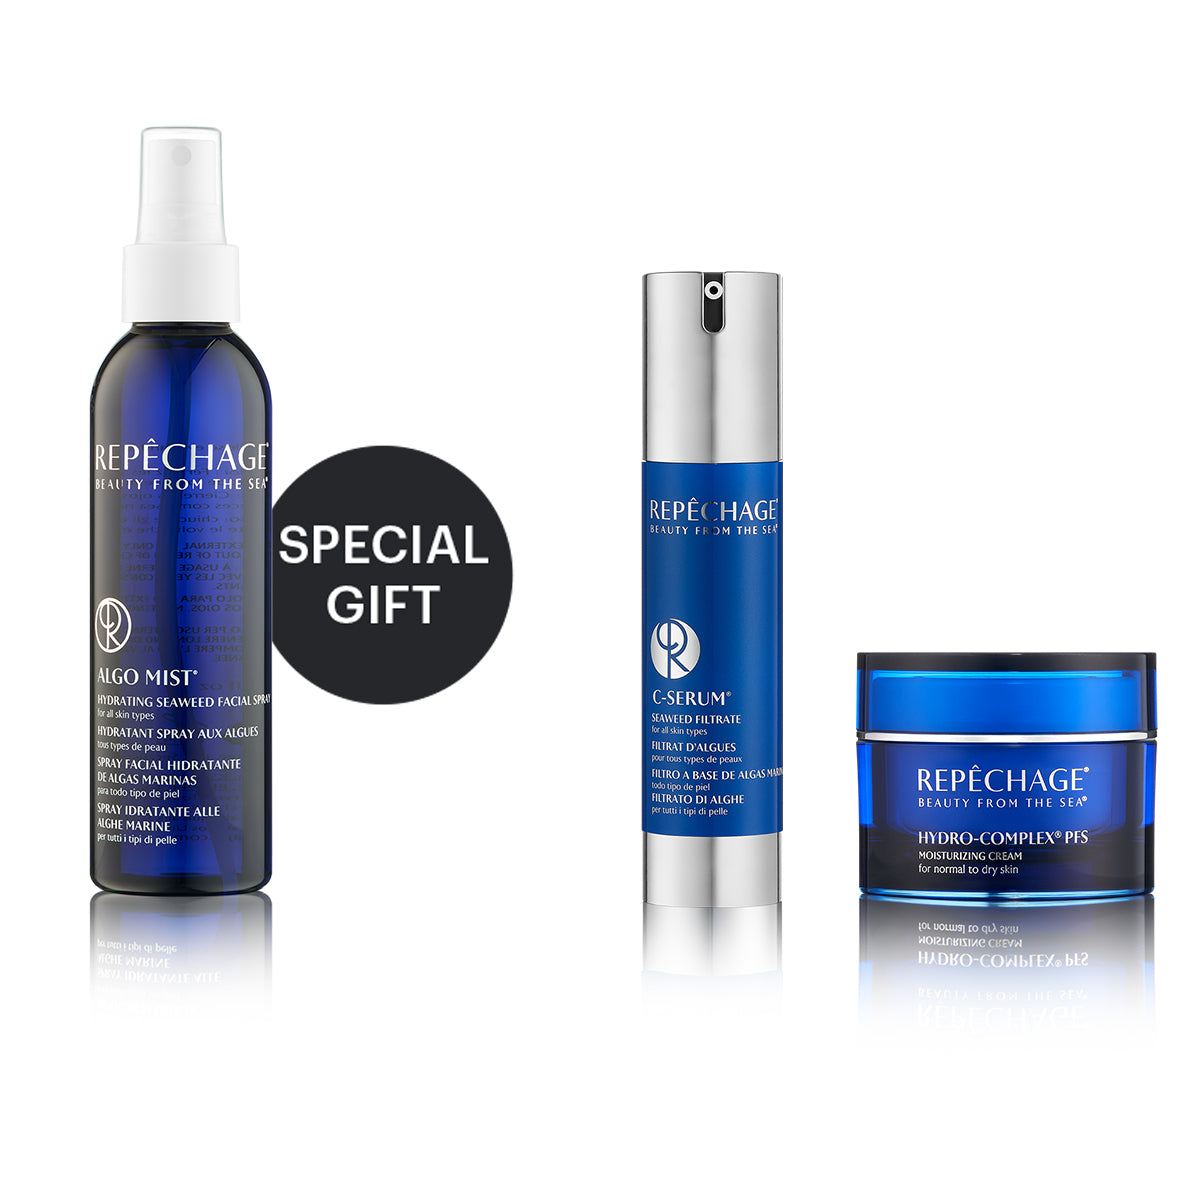 FREE ALGO MIST W/ PURCHASE OF C-SERUM & HYDRO-COMPLEX PFS for normal to dry skin